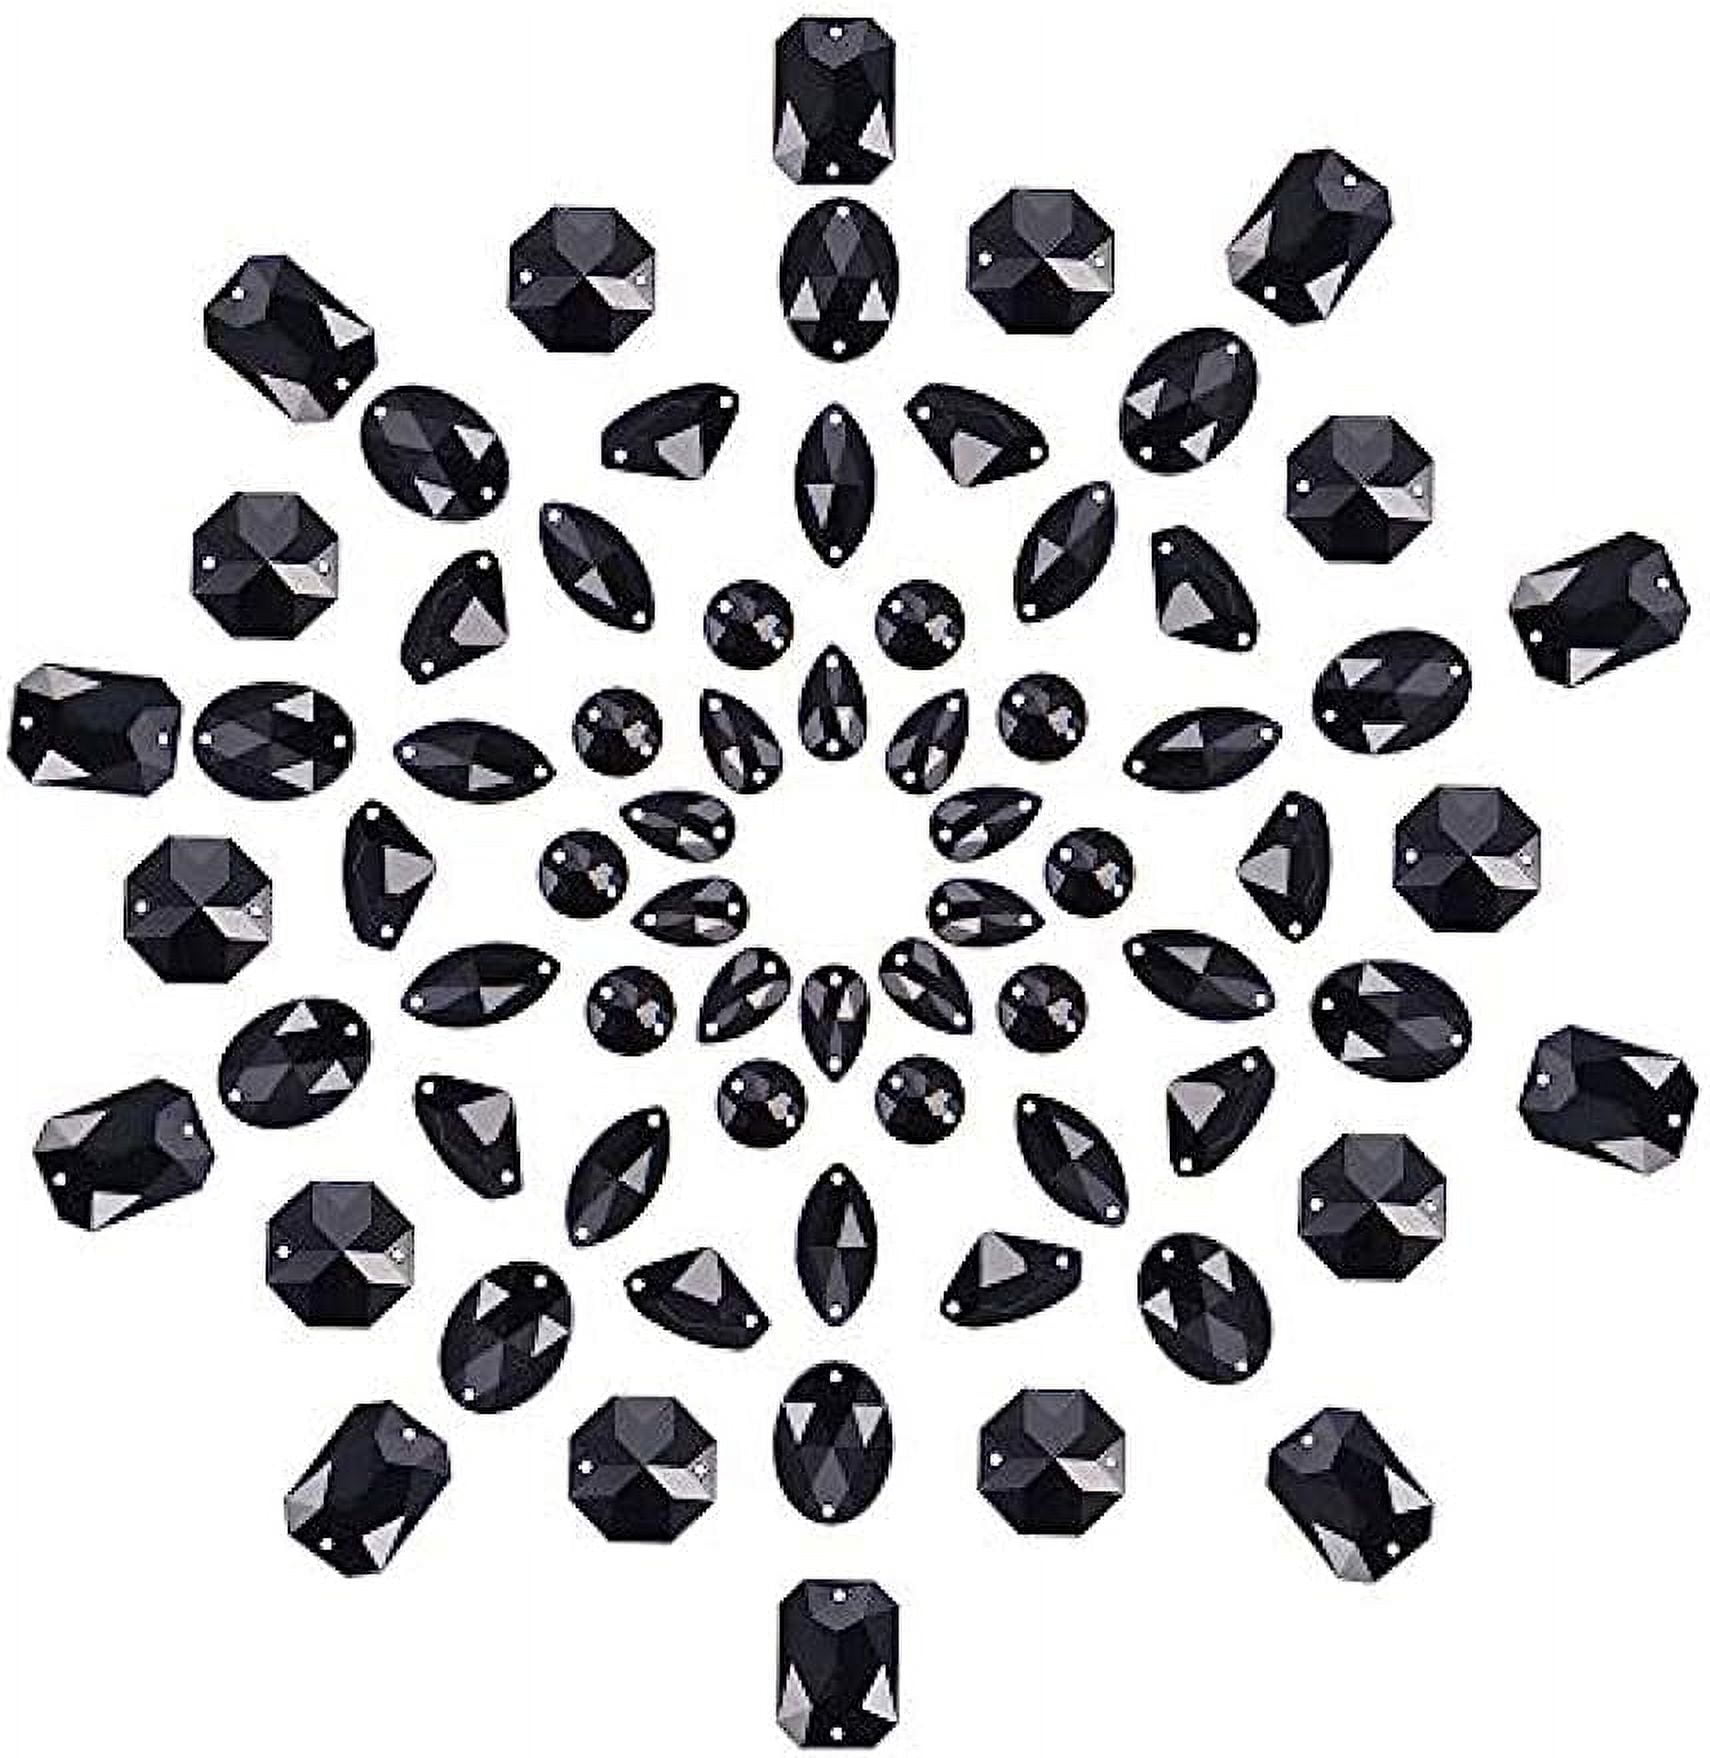 The Crafts Outlet Flatback Rhinestones, Faceted Round, 2mm, 20-pk (20X-2500-pc)